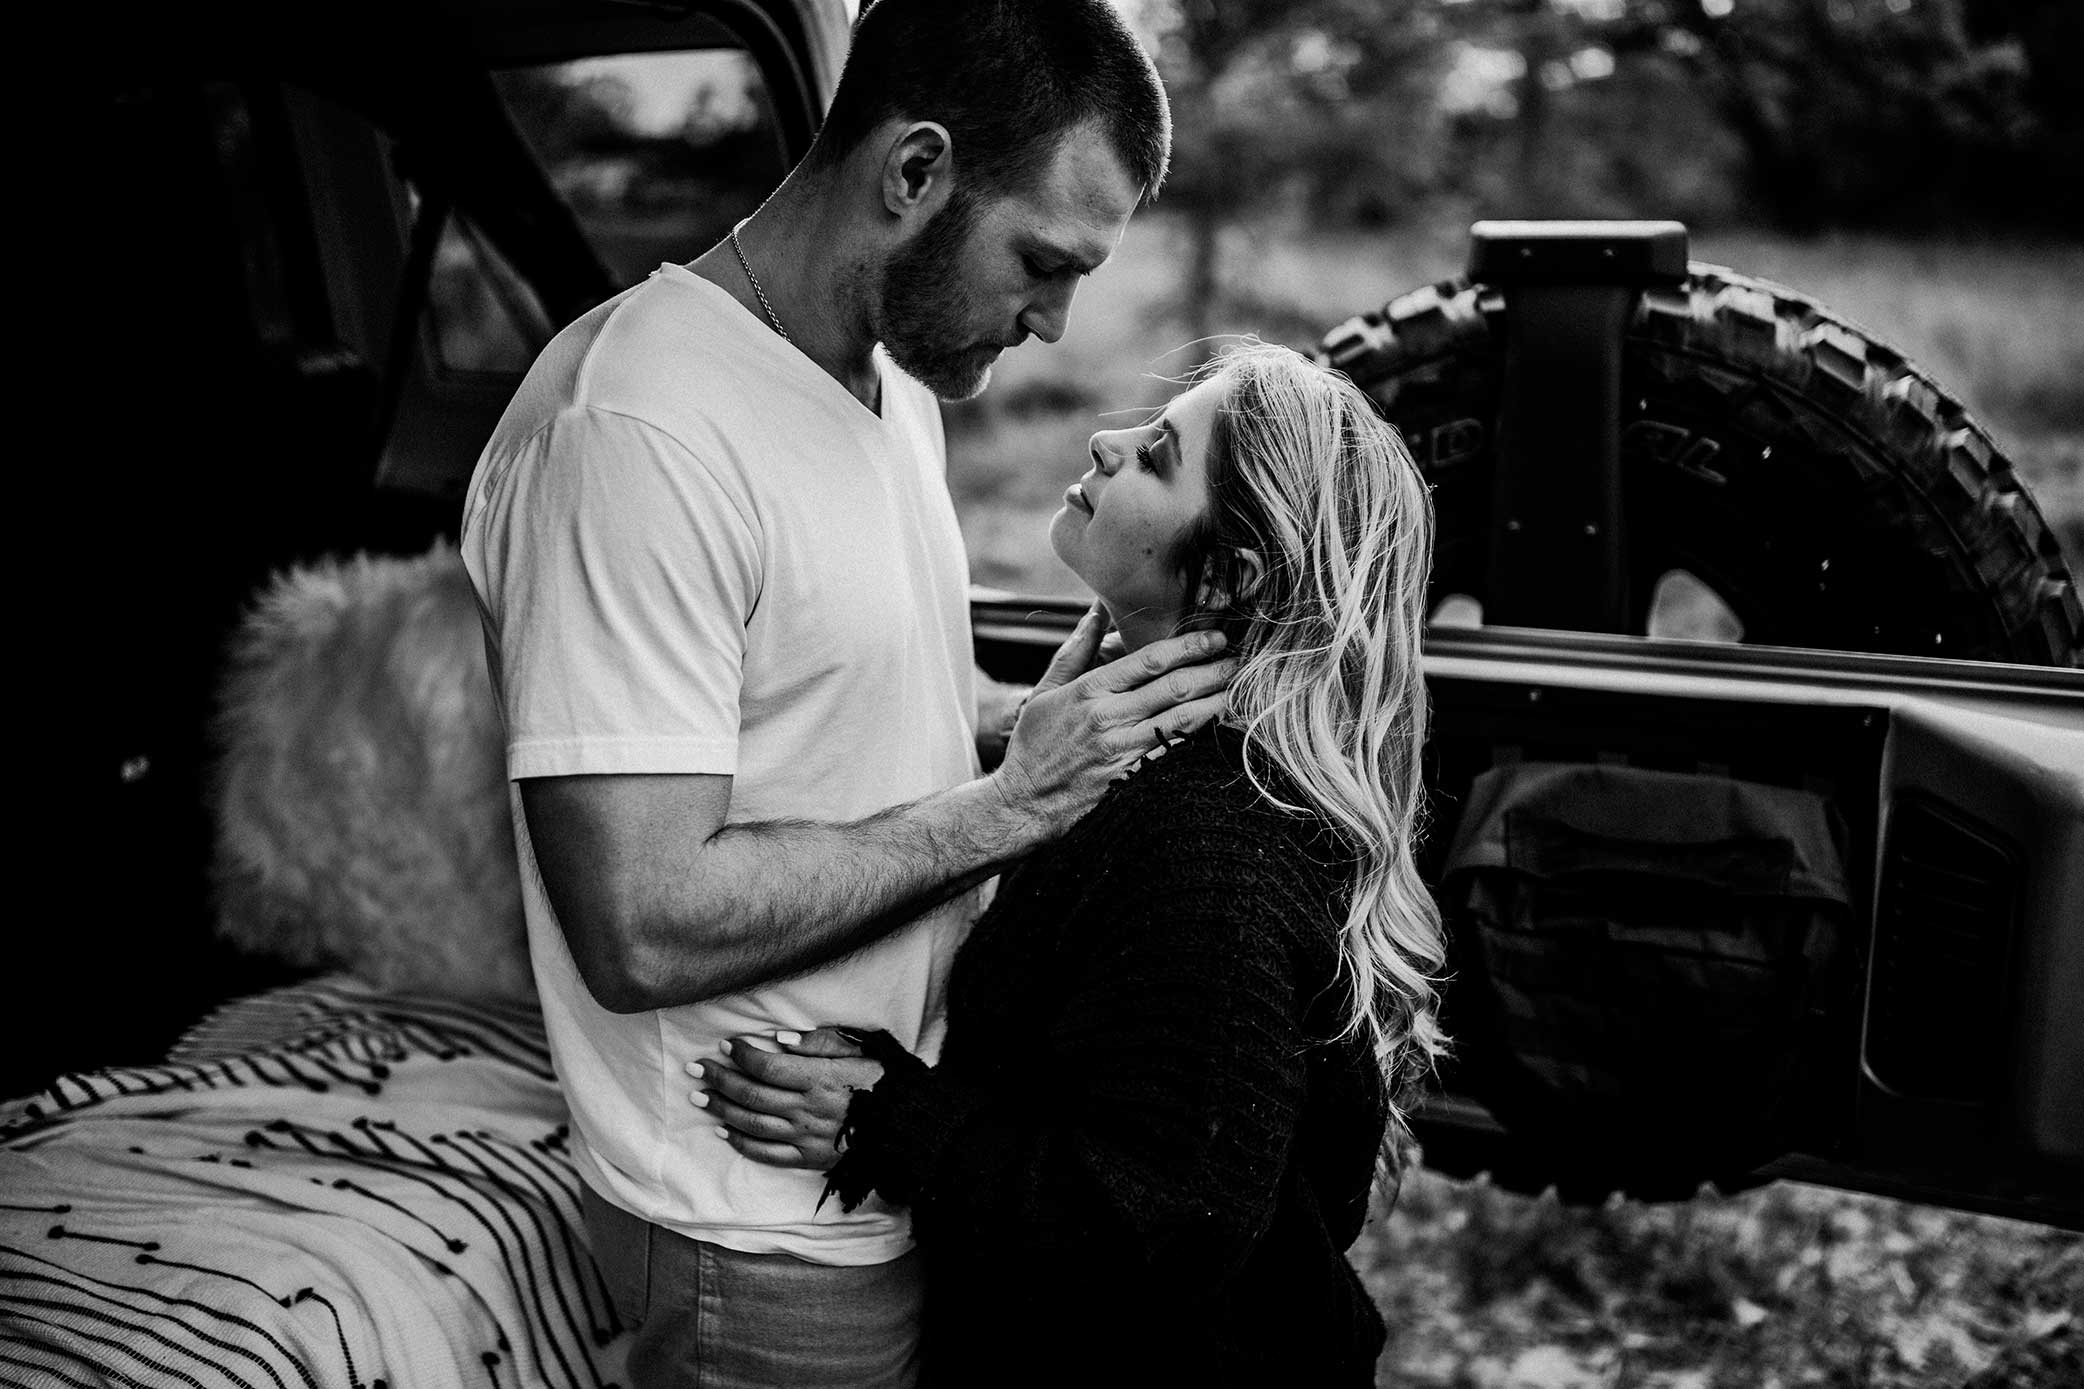 shelby-schiller-photography-lifestyle-couples-remi-colt-outdoor-jeep-adventure-7.jpg